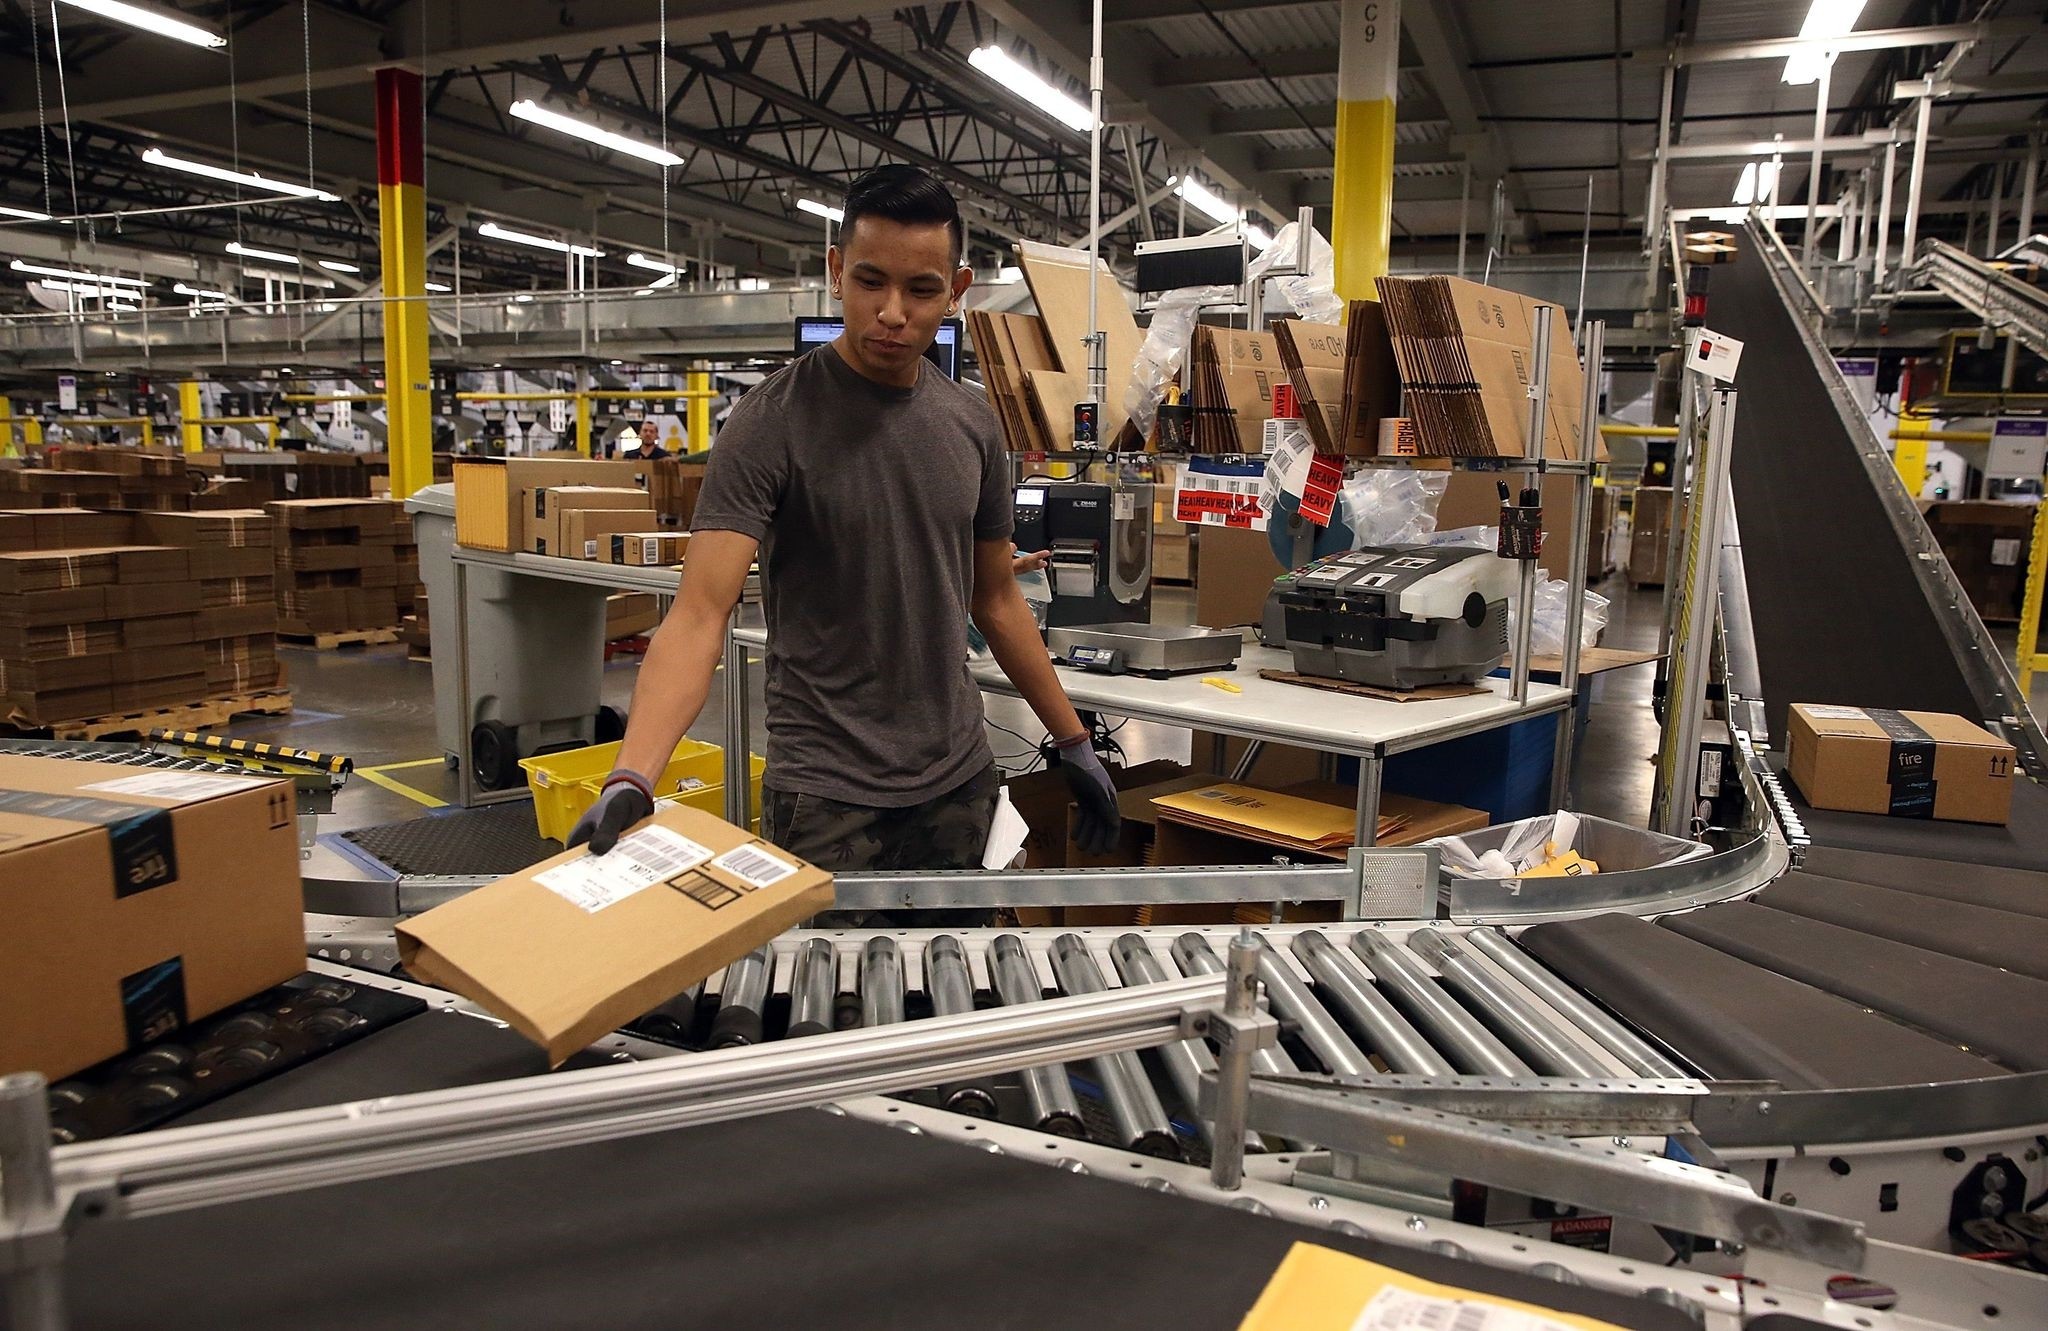 An Amazon.com worker sorts packages onto a conveyor belt at an Amazon fulfillment center in Tracy, California.